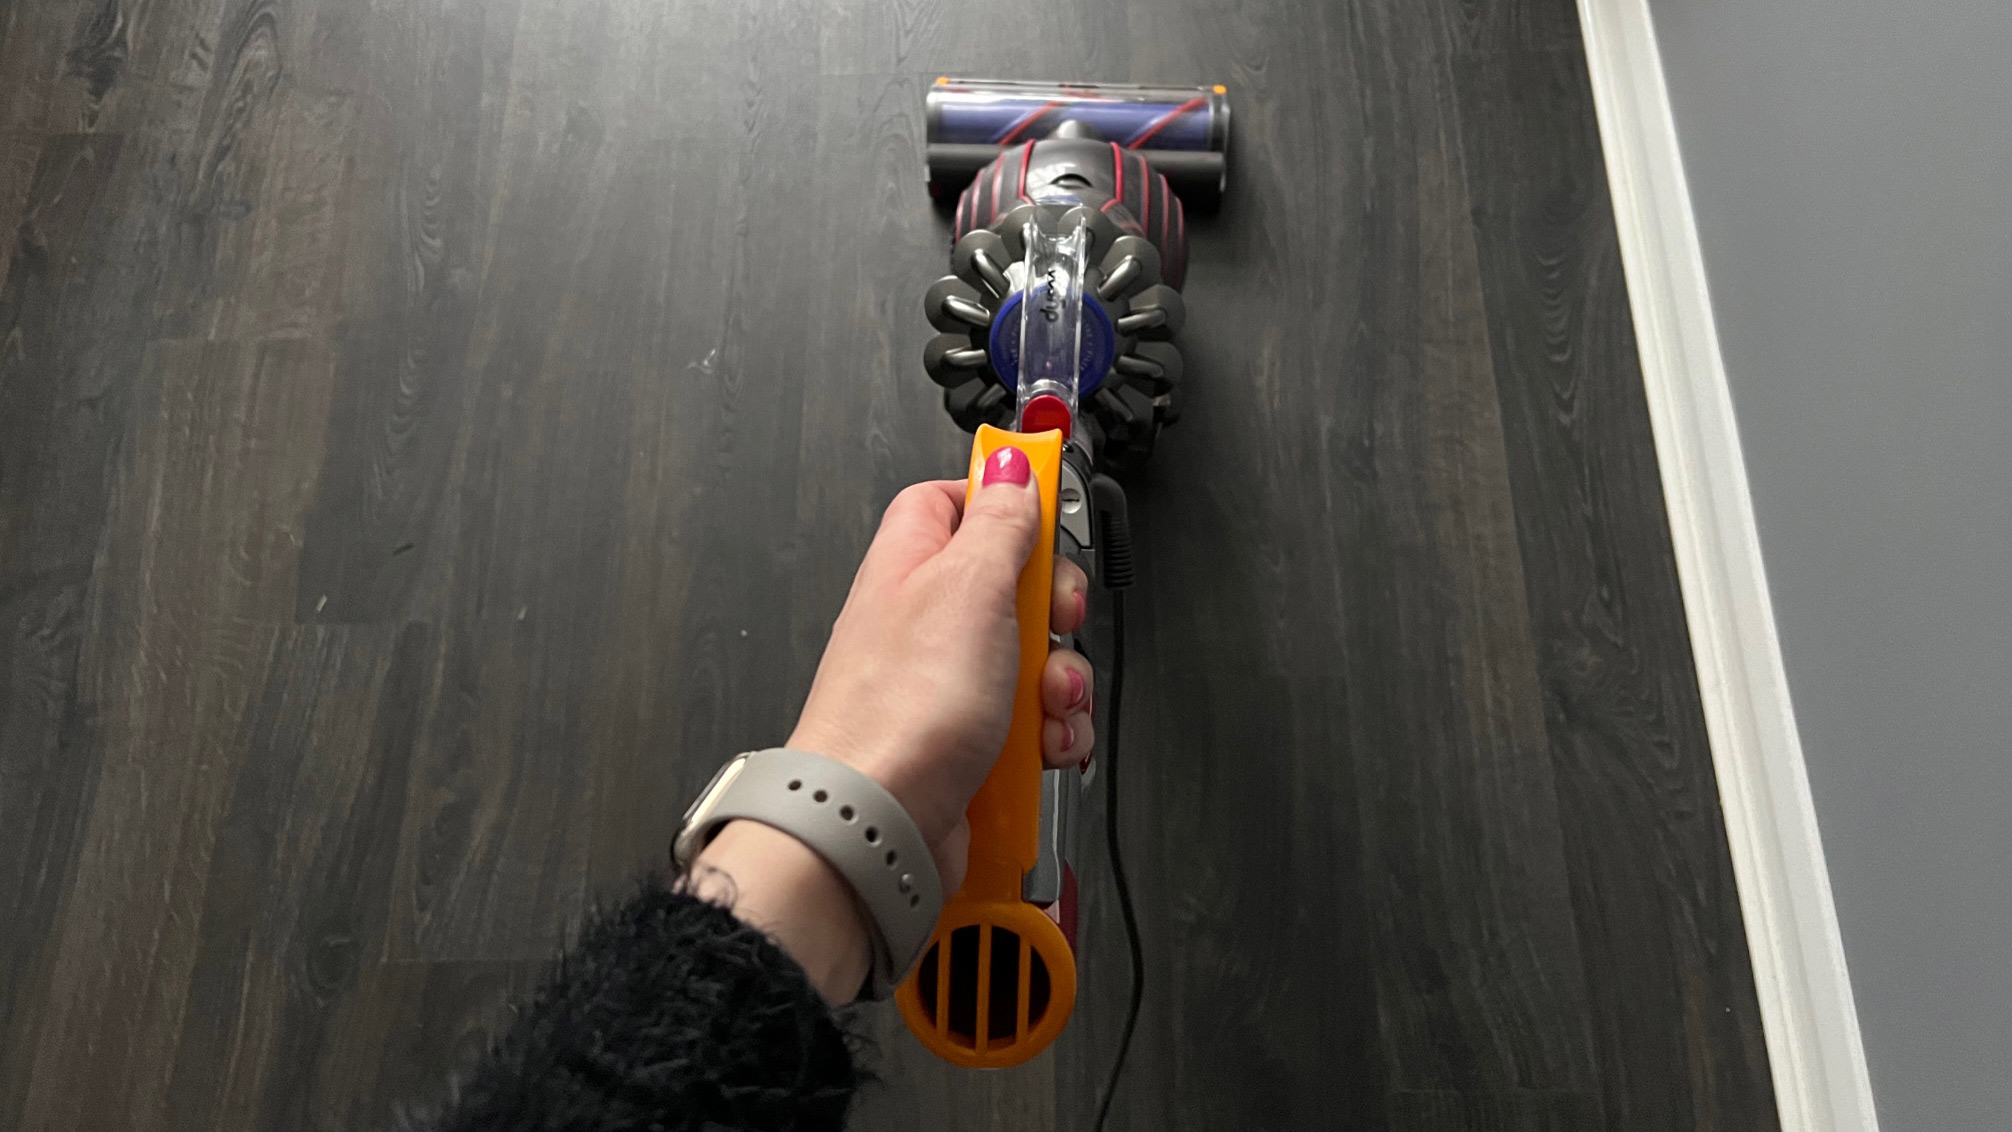 The Dyson Ball Animal 2 being used to clean a hard floor